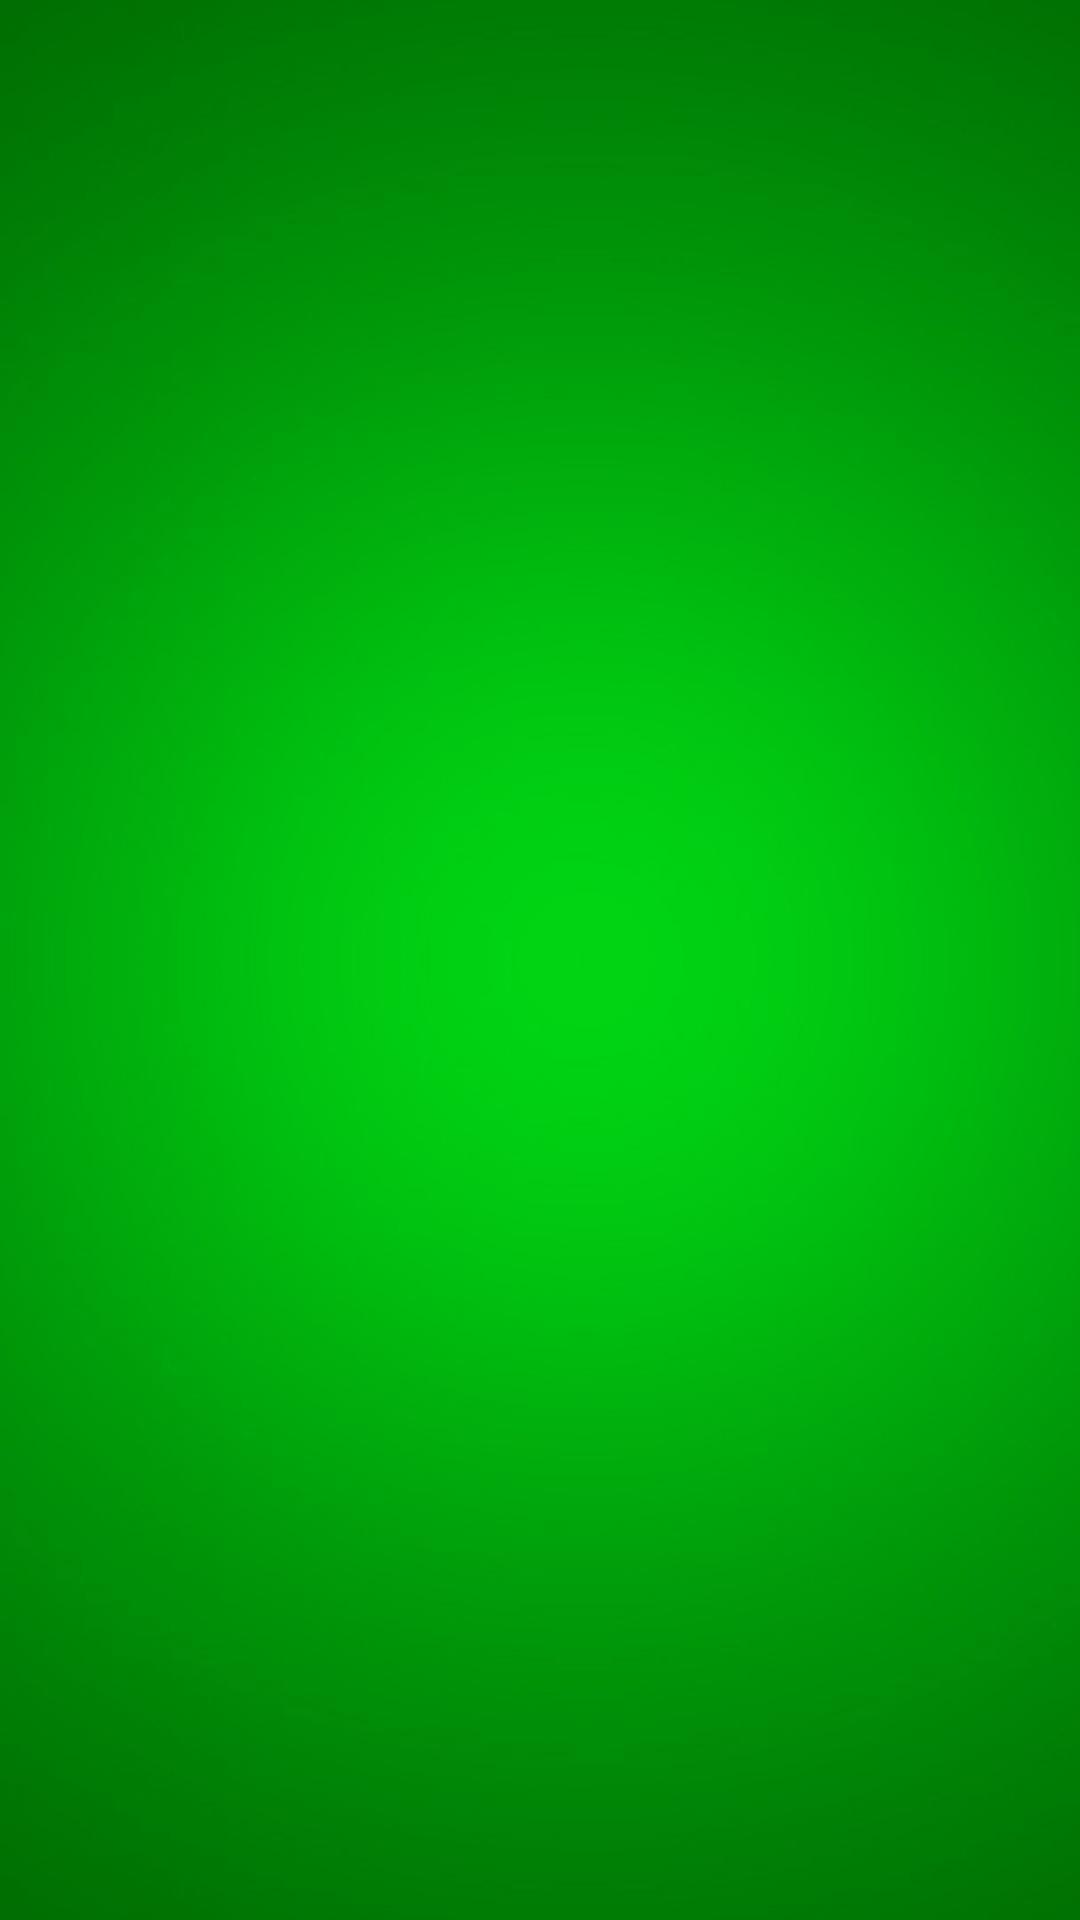 Green plain backgrounds Wallpapers